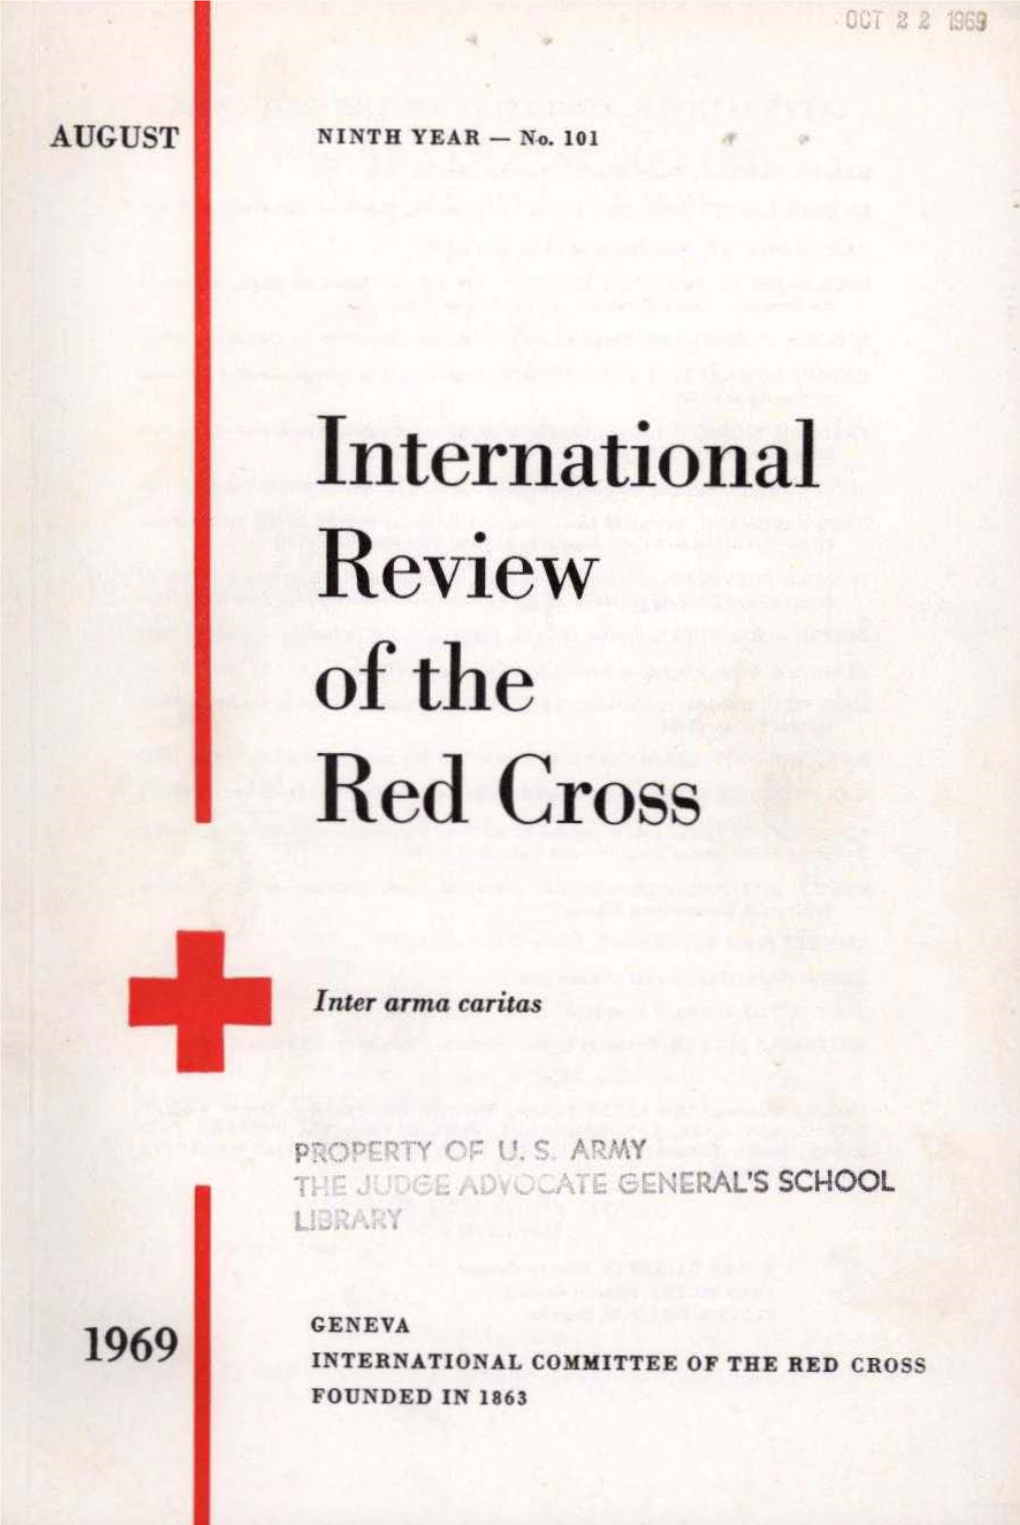 International Review of the Red Cross, August 1969, Ninth Year